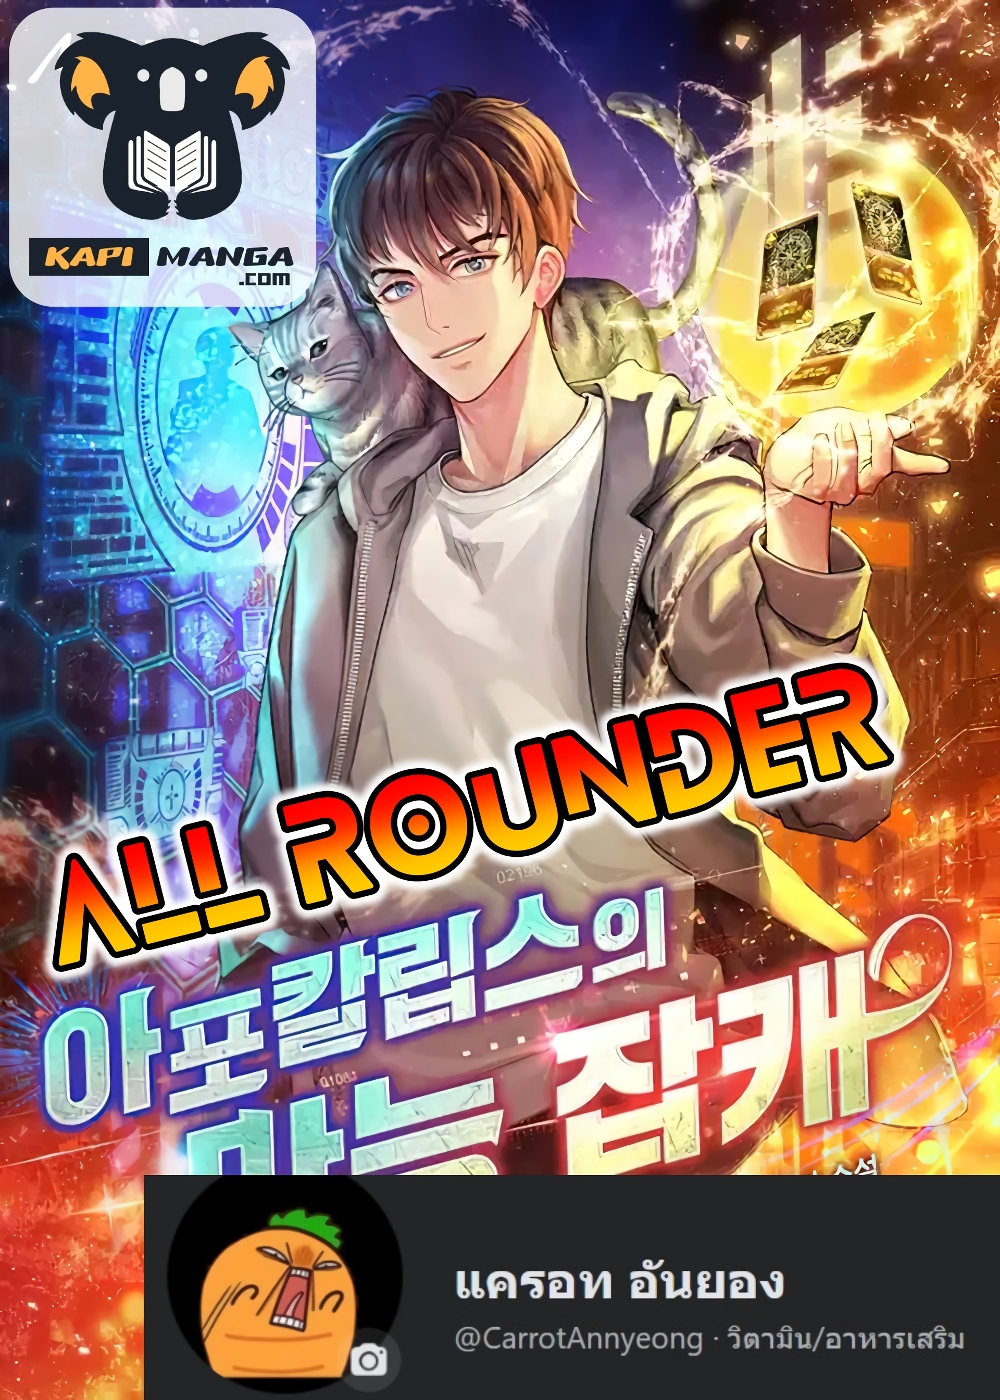 All Rounder31 (1)